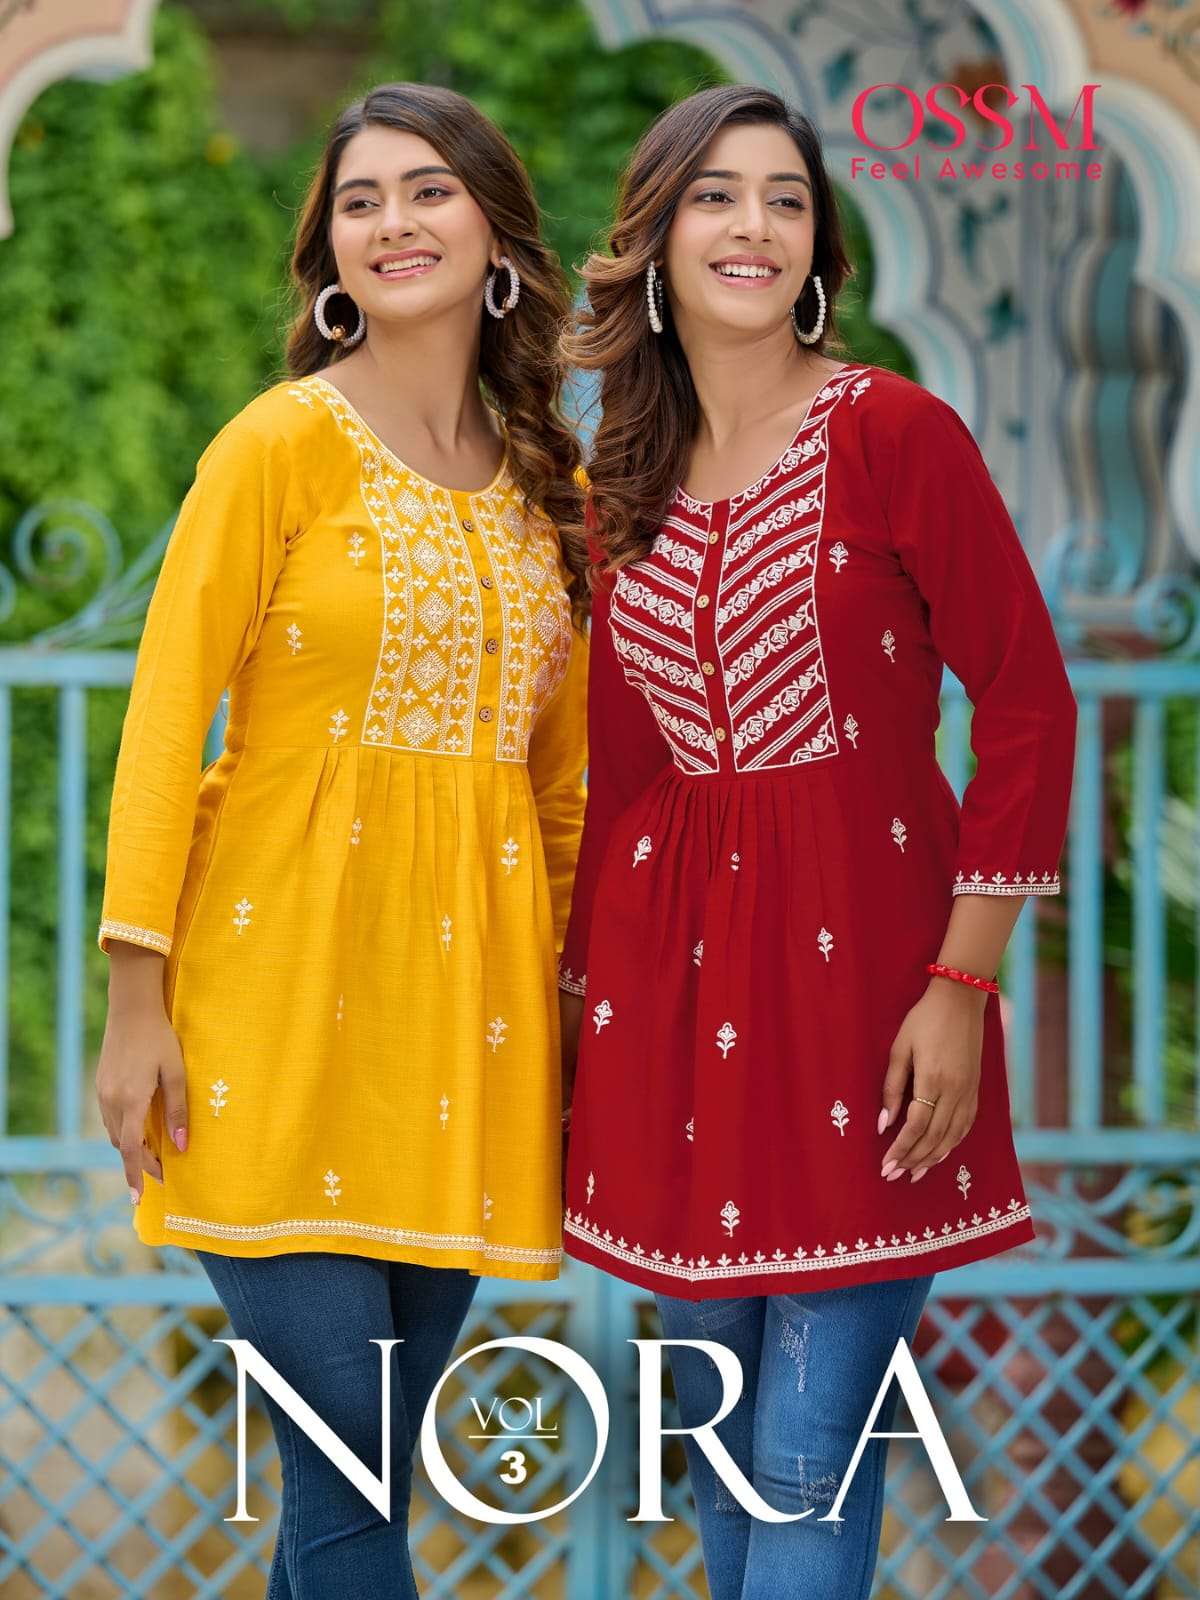 NORA VOL 3 HEAVY REYON SLUB 16KG COTTON EMBROIDERY WORK TOP BY OSSM BRAND WHOLESALER AND DEALER